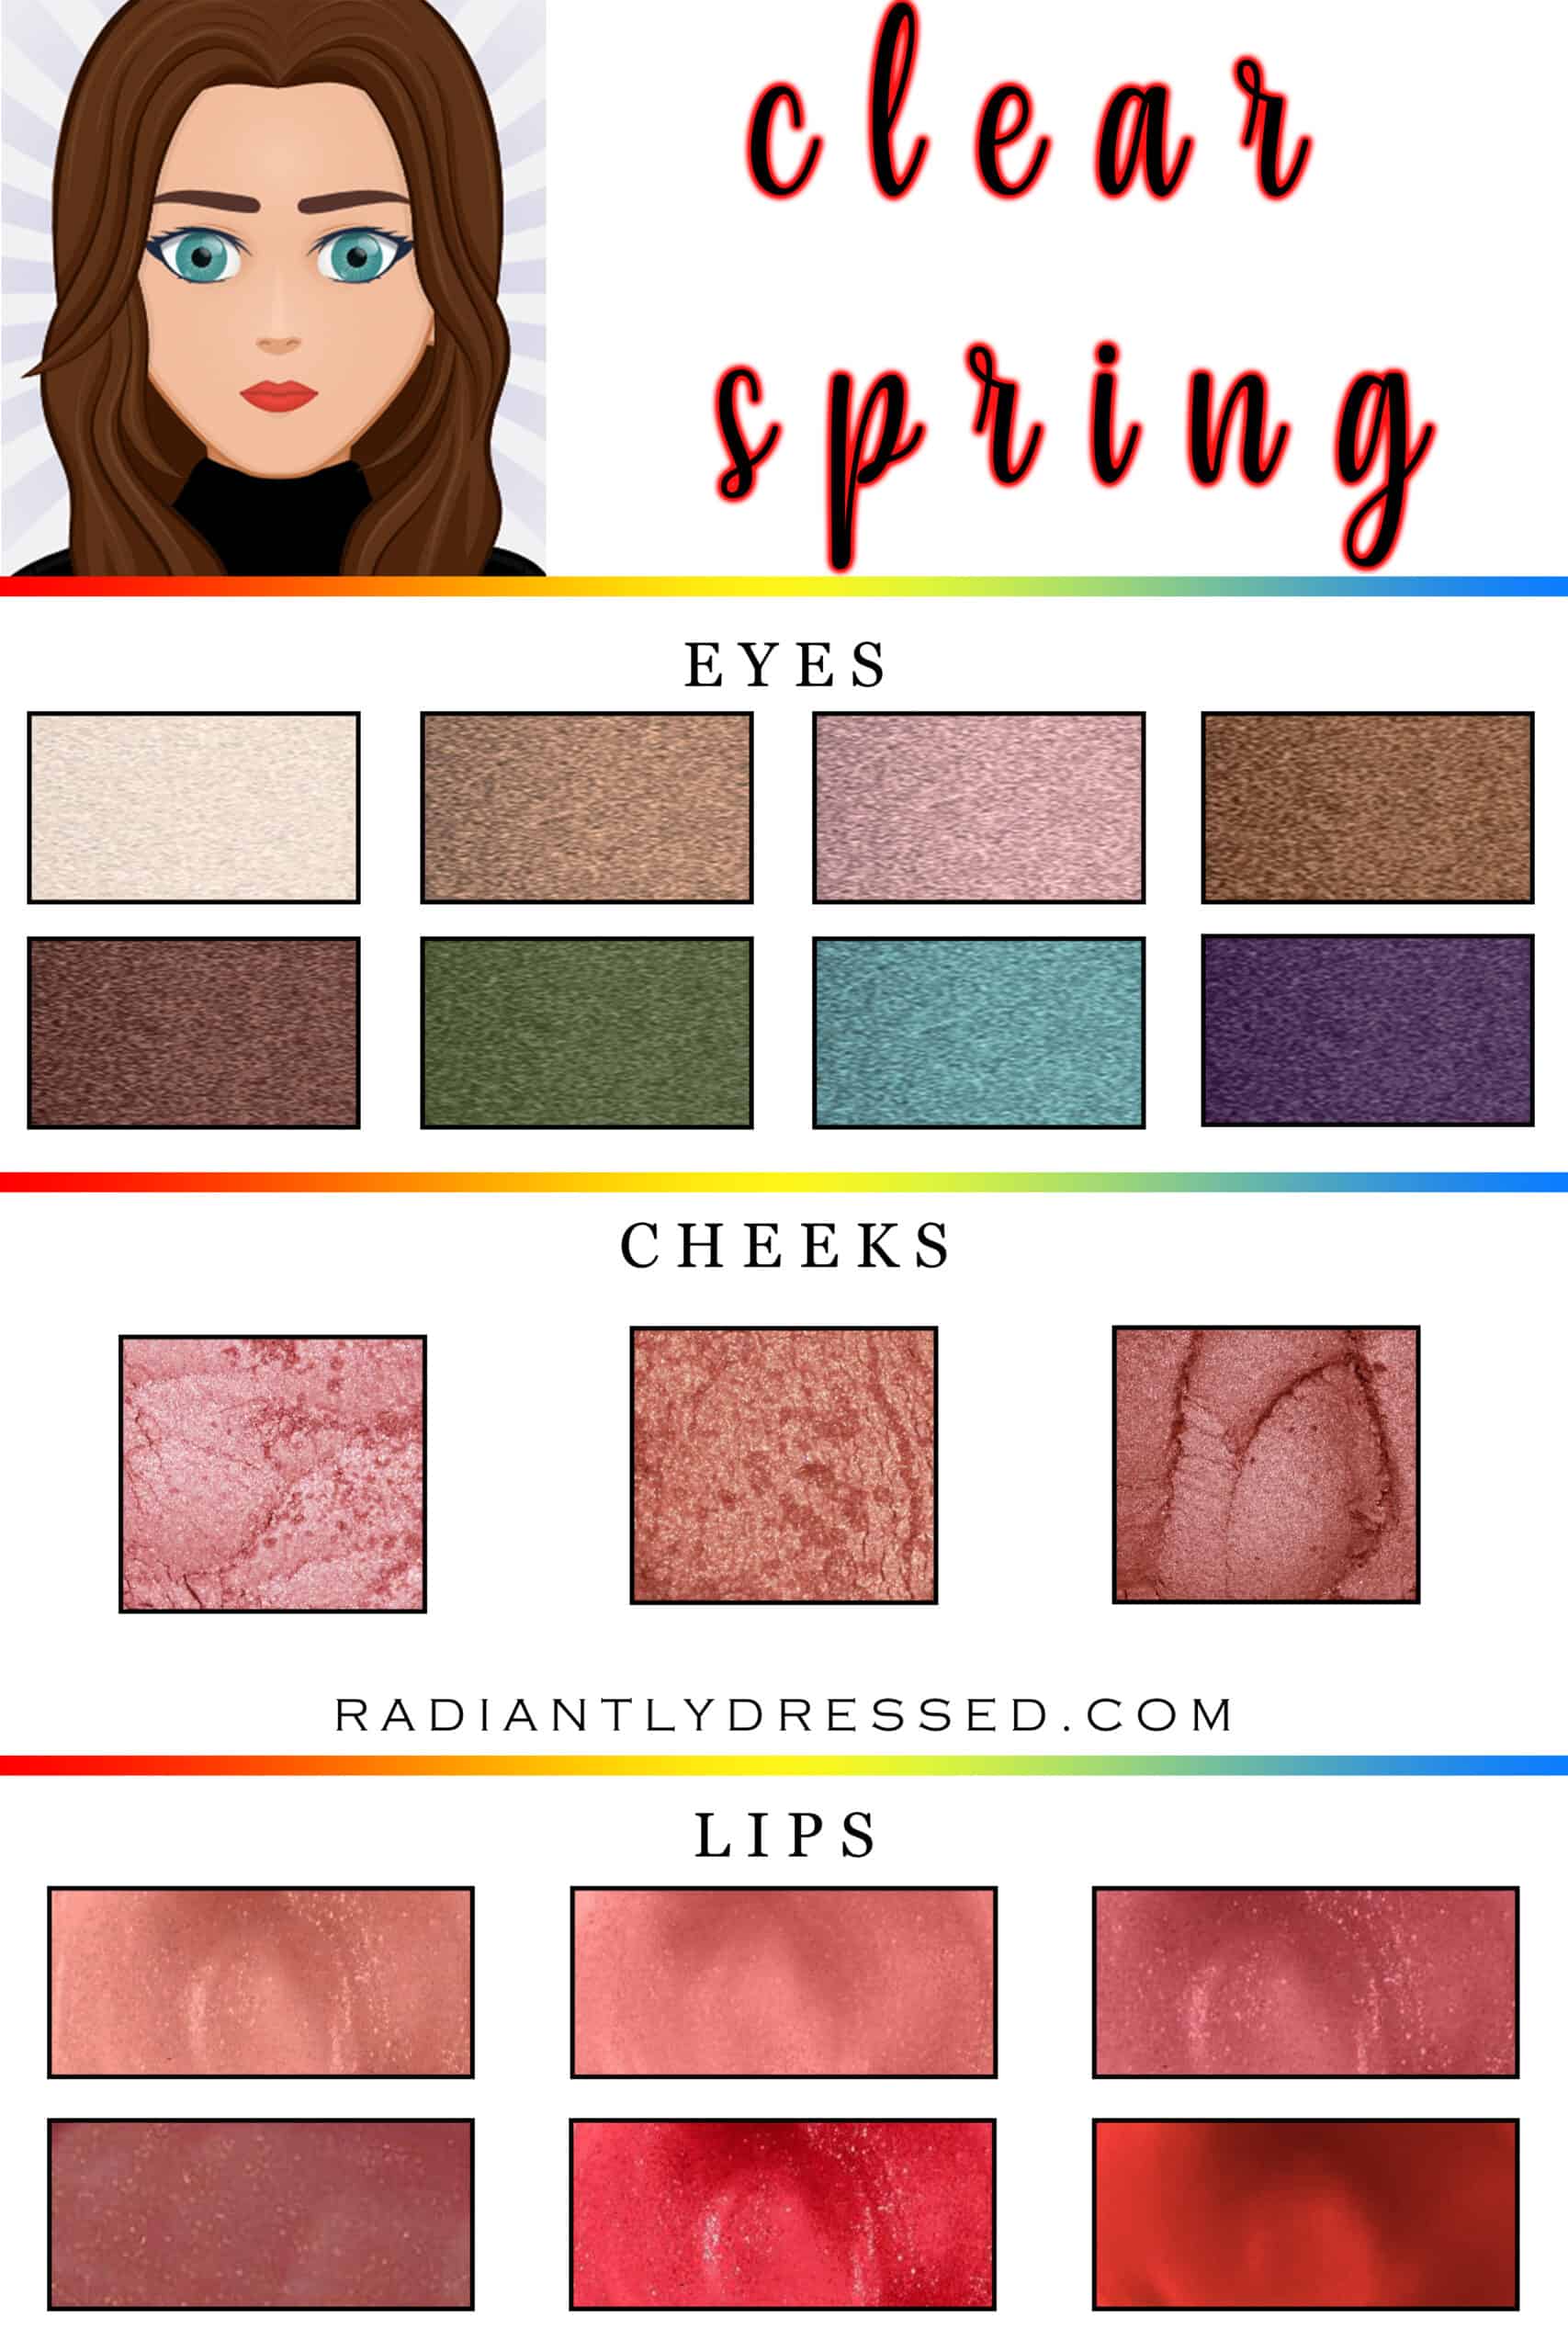 The best makeup for clear spring.